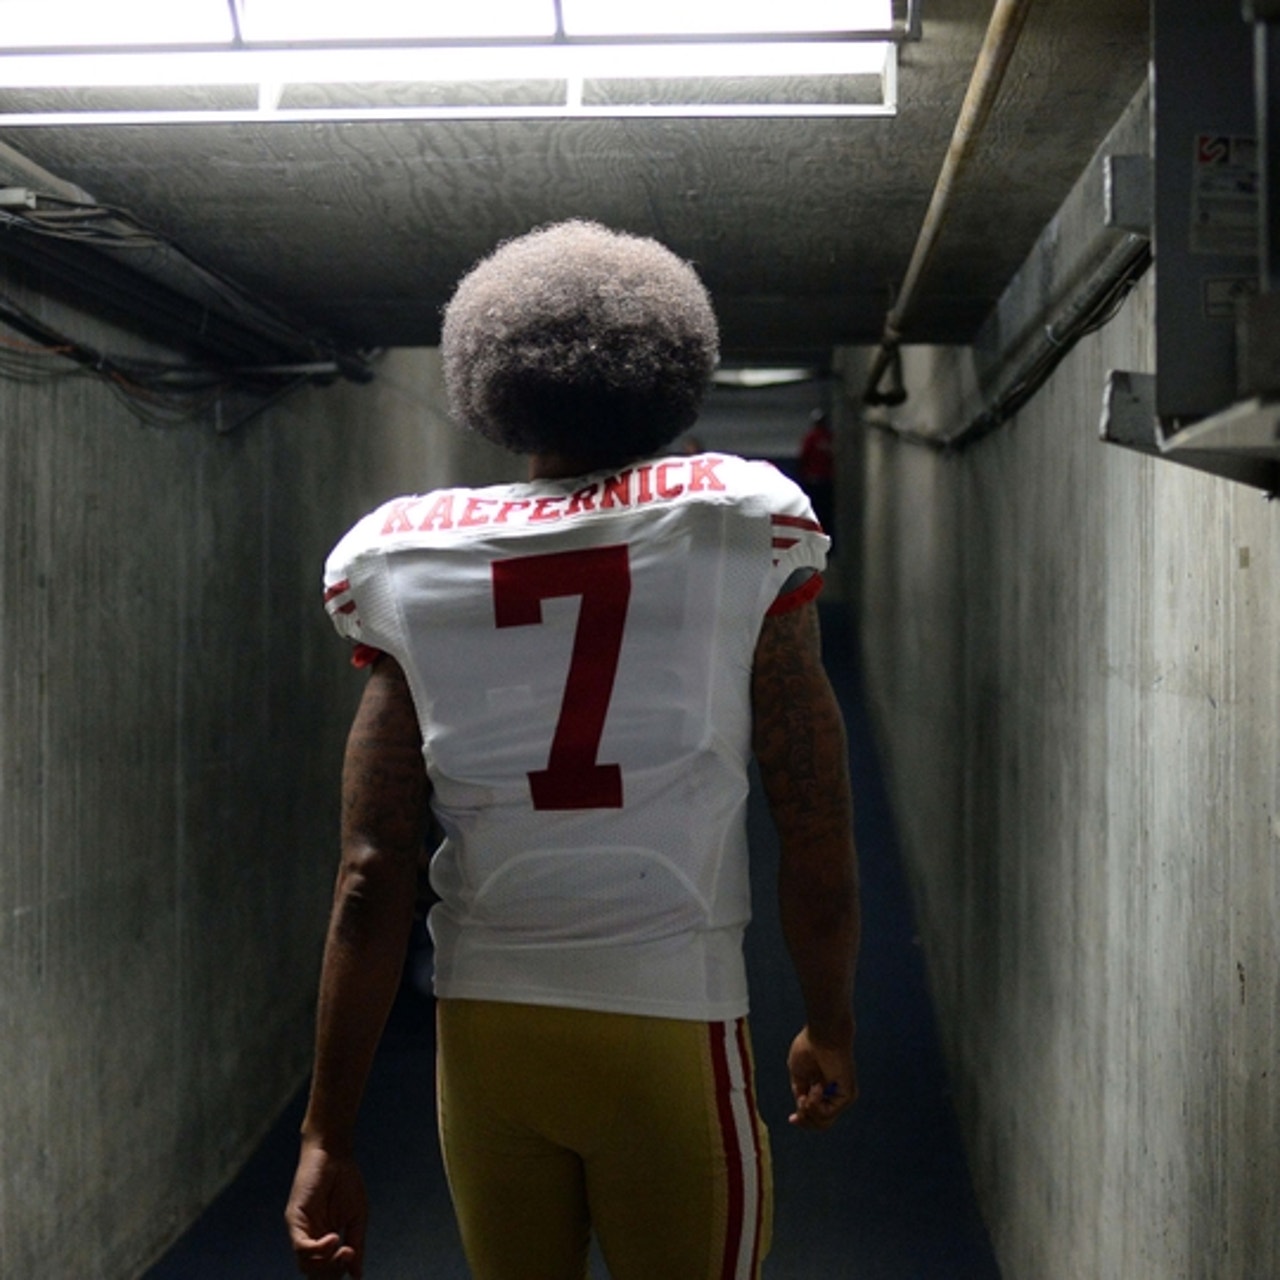 Colin Kaepernick is NFL's most hated player according to poll